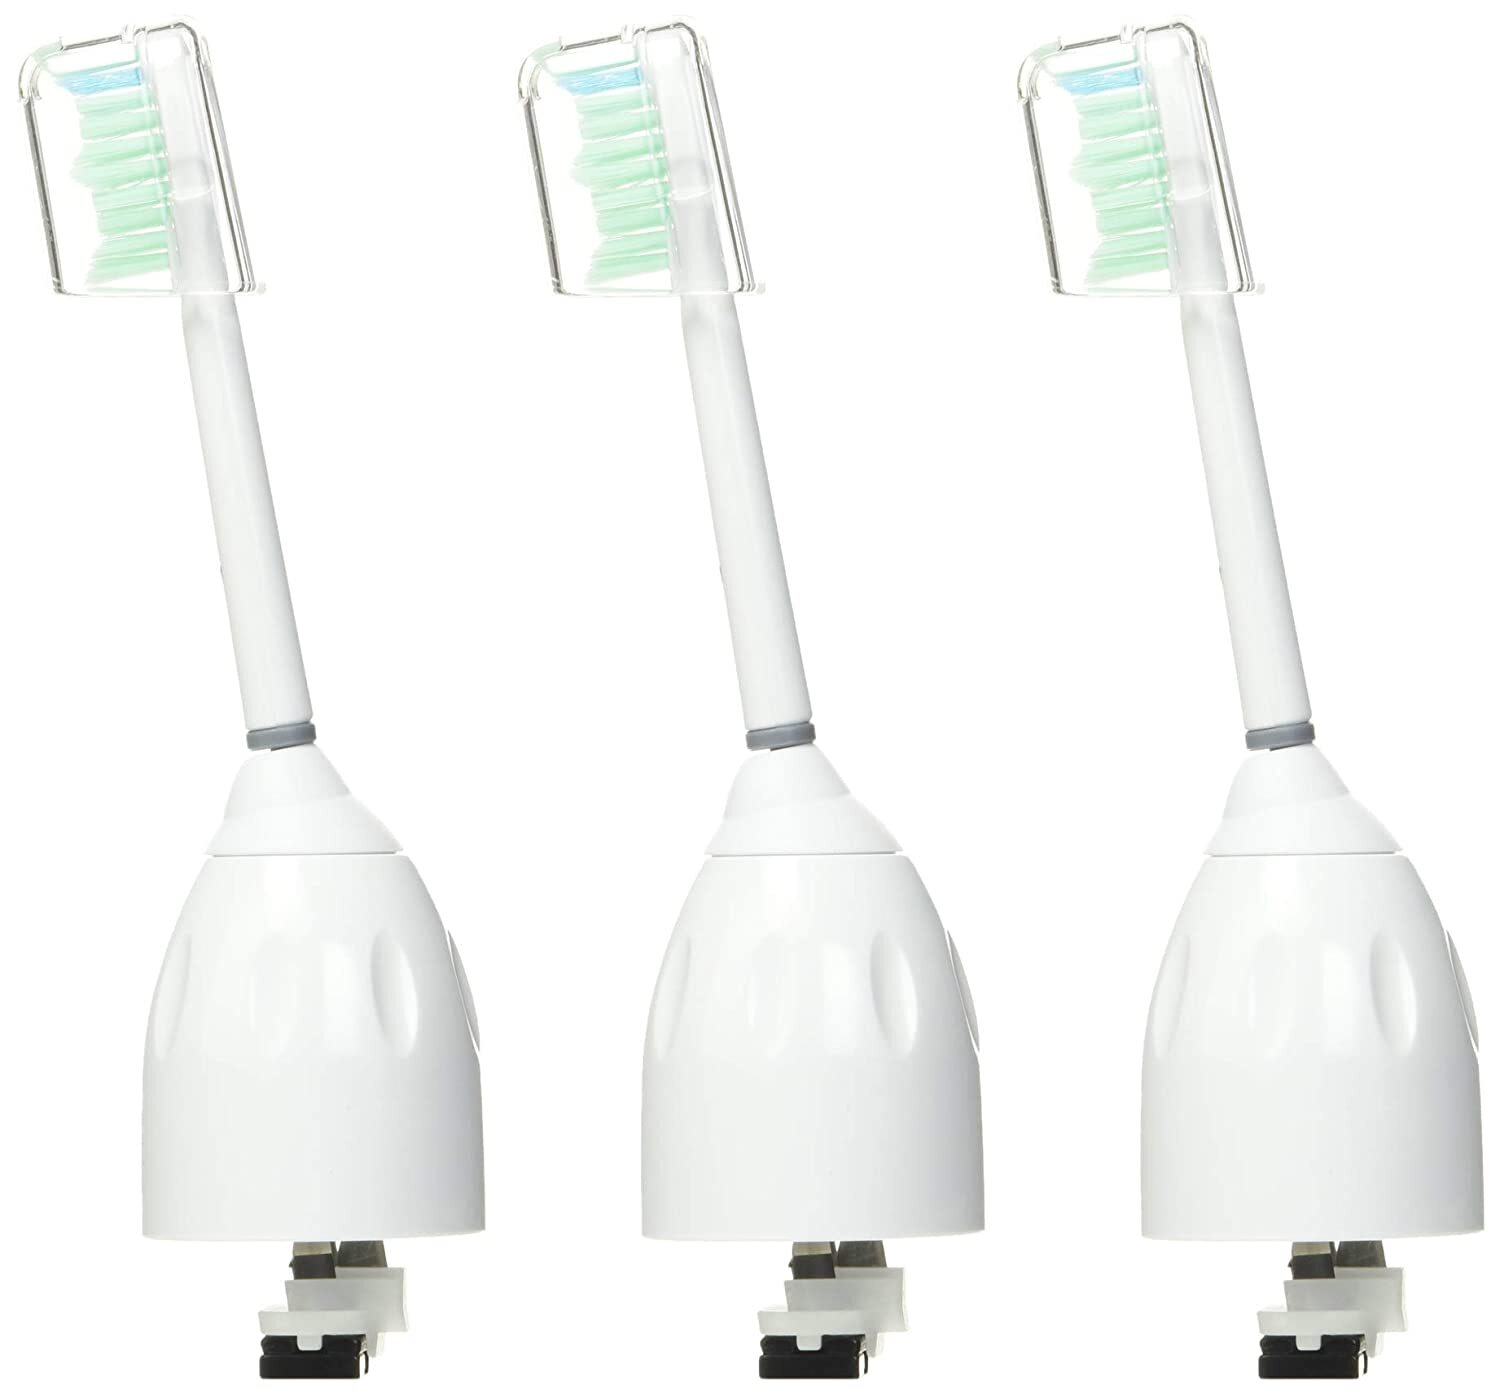 Philips Sonicare Toothbrush Replacement Heads E Series